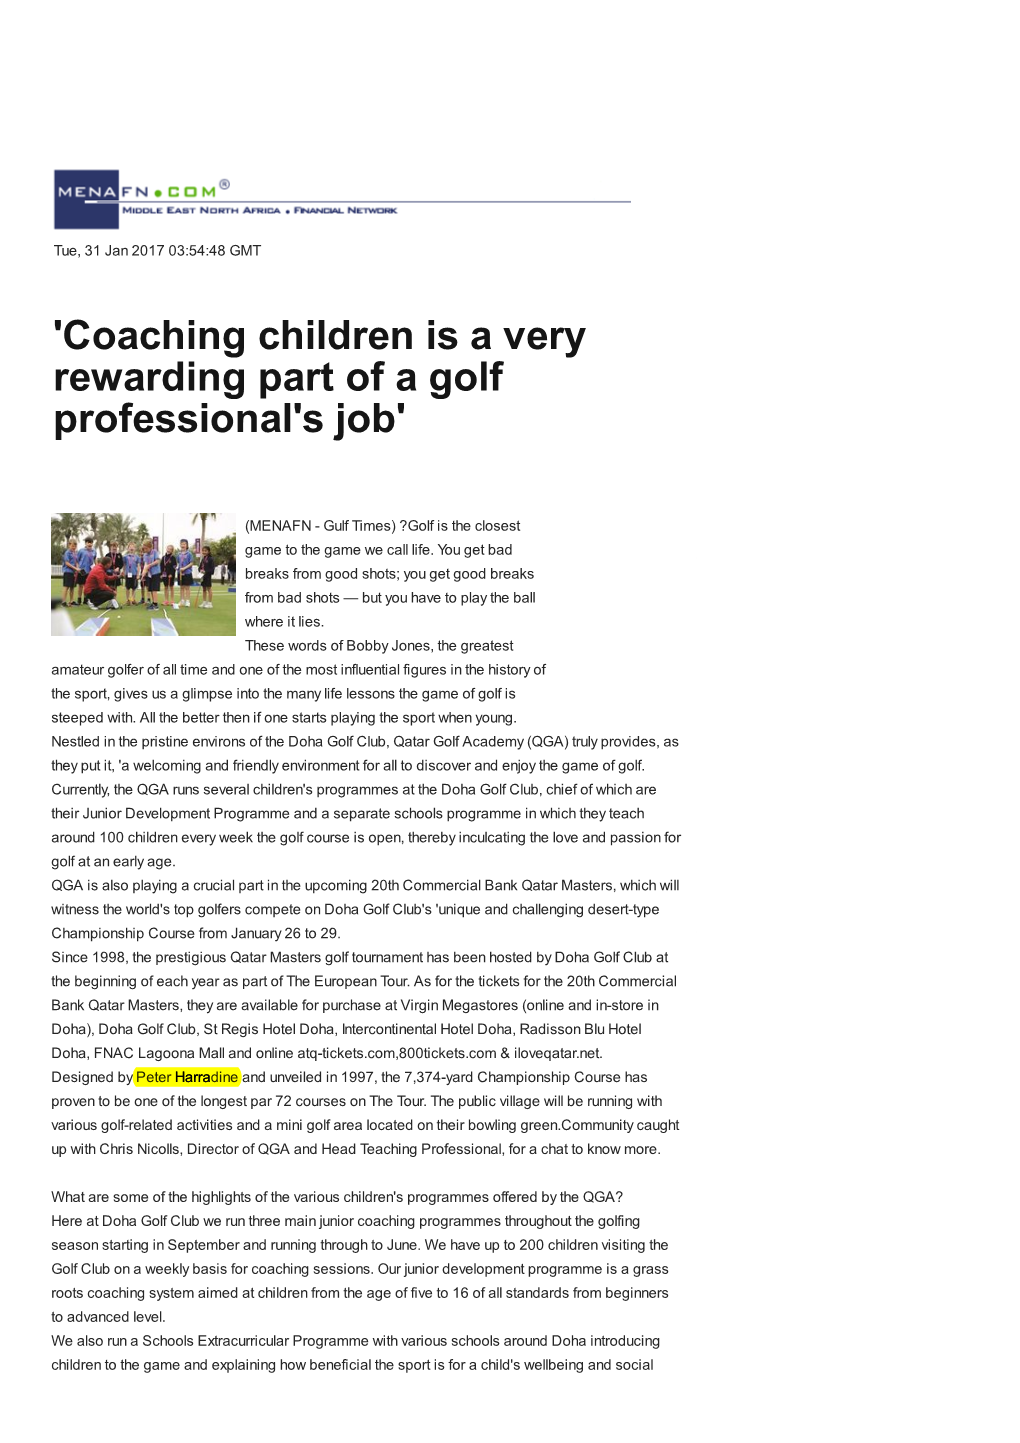 Coaching Children Is a Veryrewarding Part of a Golfprofessional's